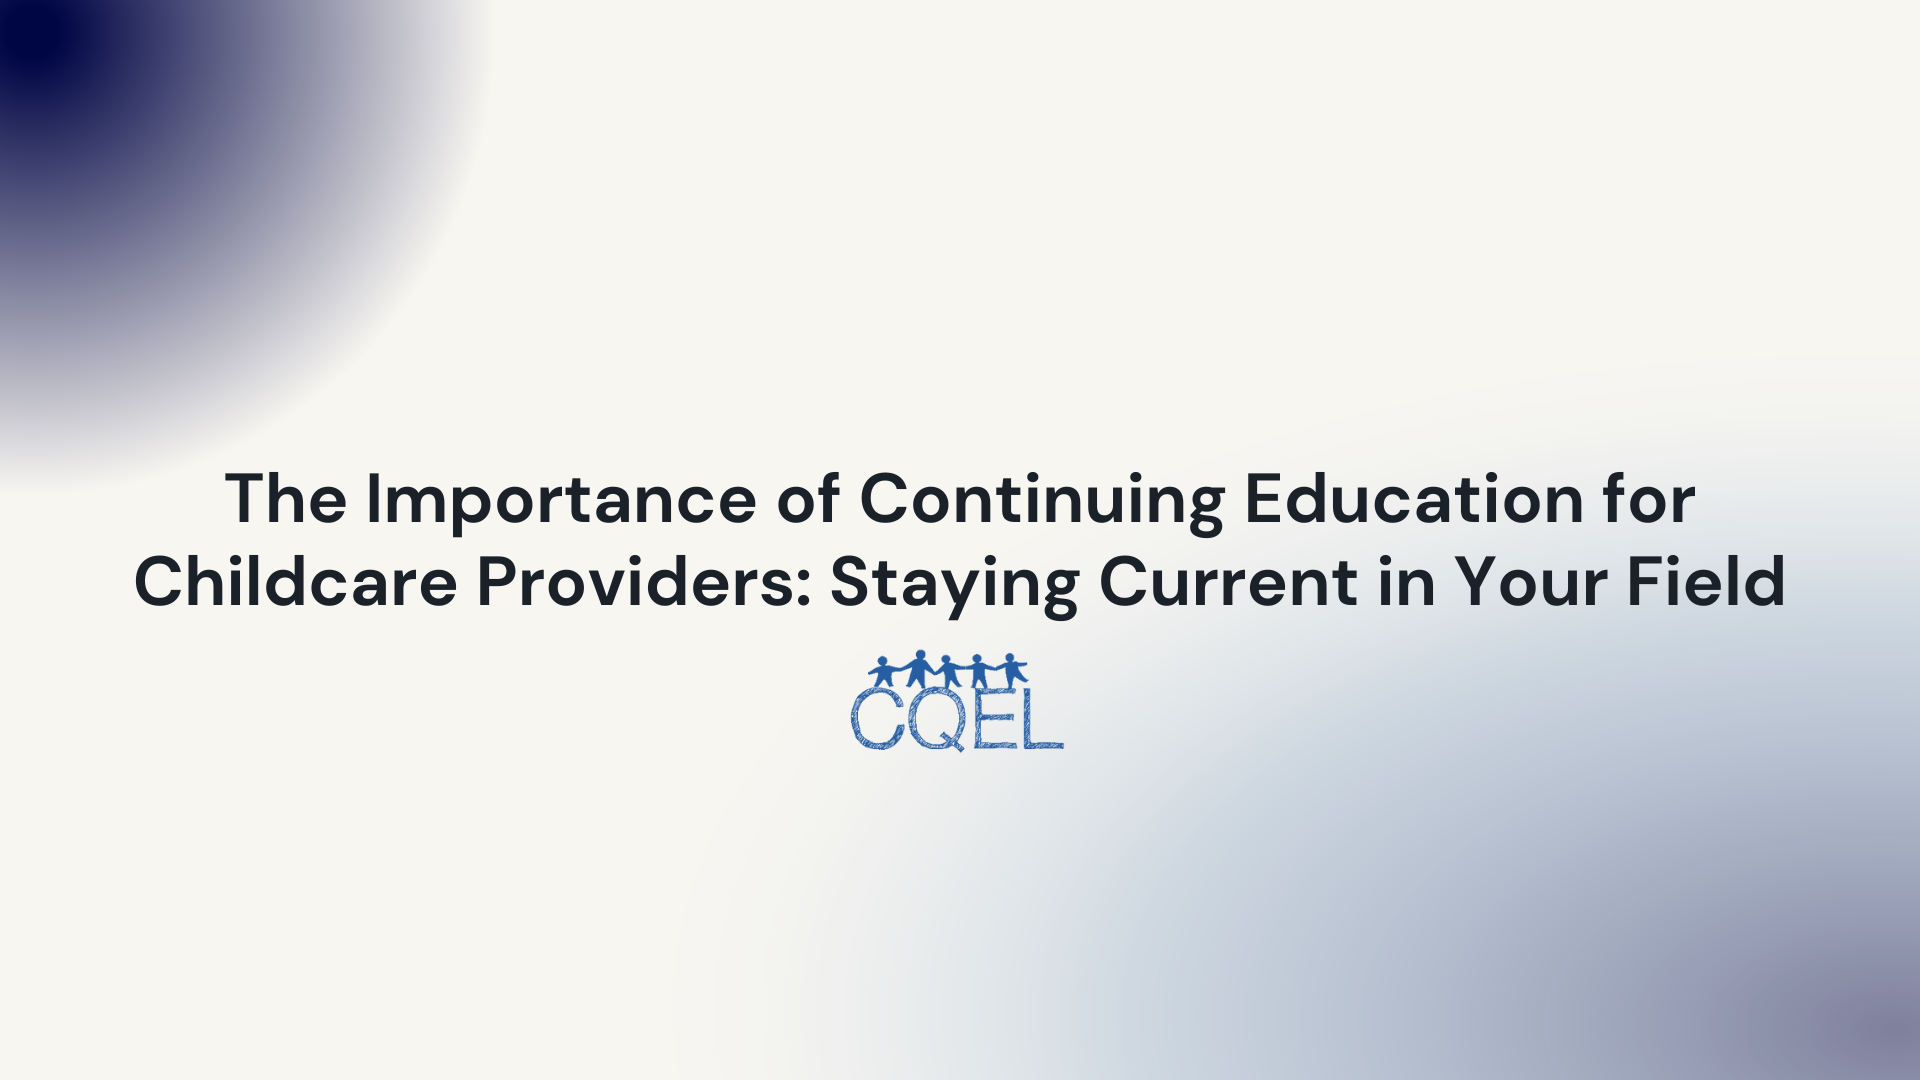 The Importance of Continuing Education for Childcare Providers: Staying Current in Your Field